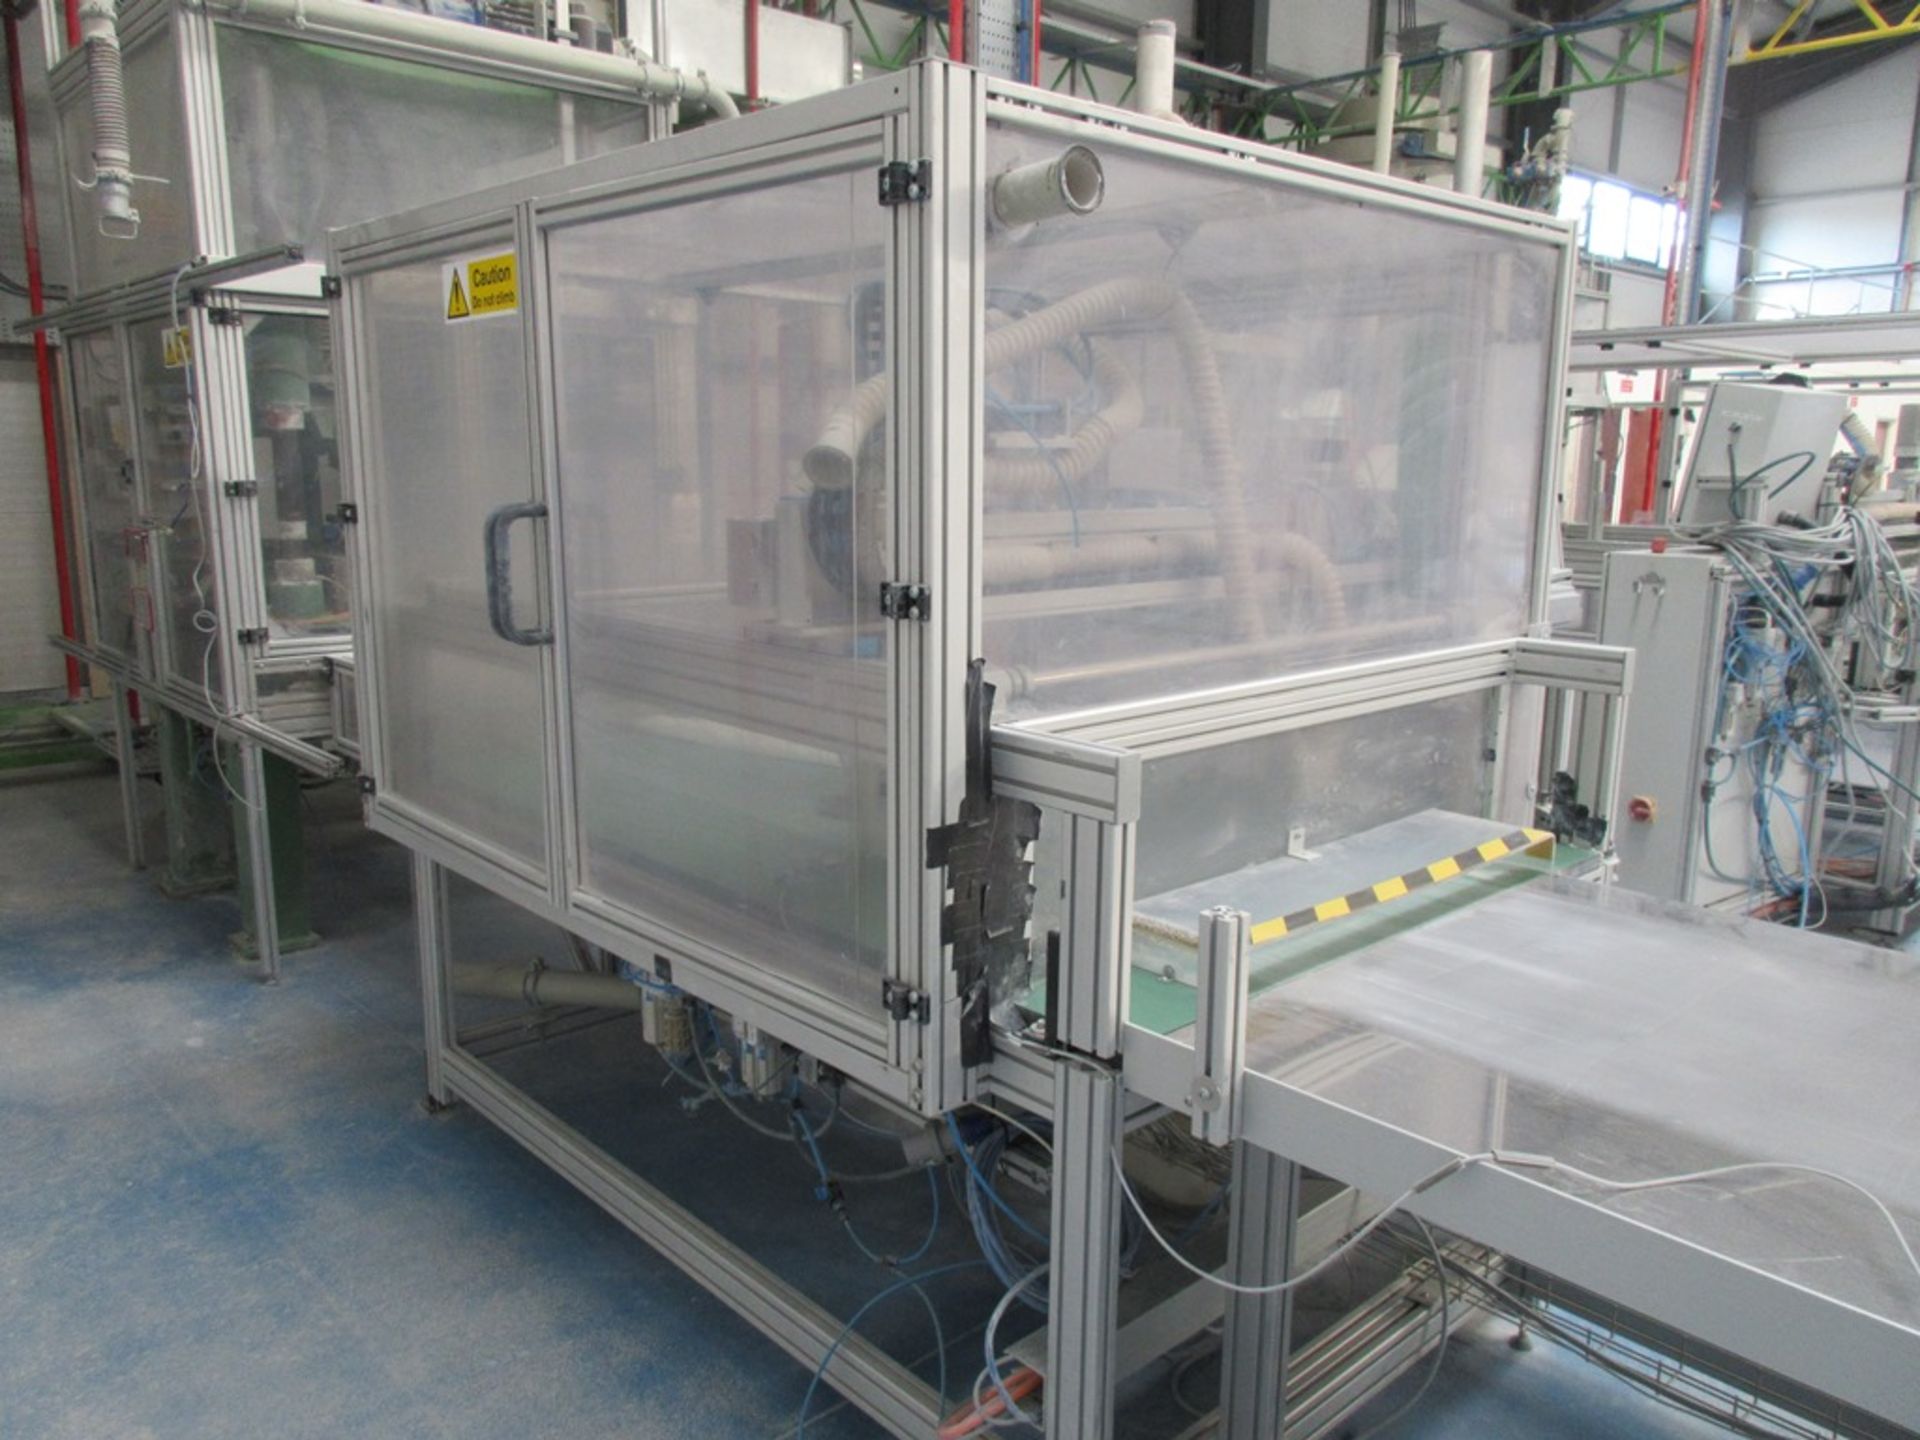 Gasbarre insulation board, 28 tonne electric press (no serial no.), bed size 680 x 980mm, working - Image 5 of 11